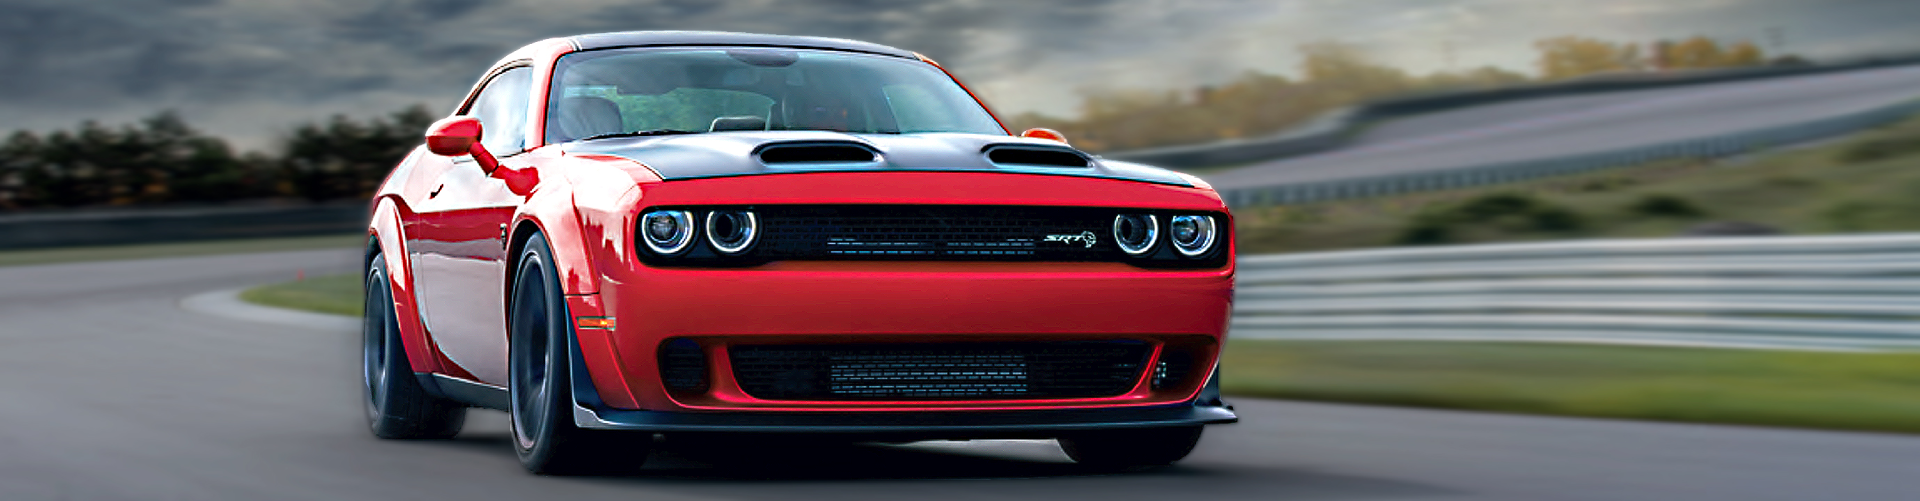 Buy Genuine DODGE Parts and Accessories